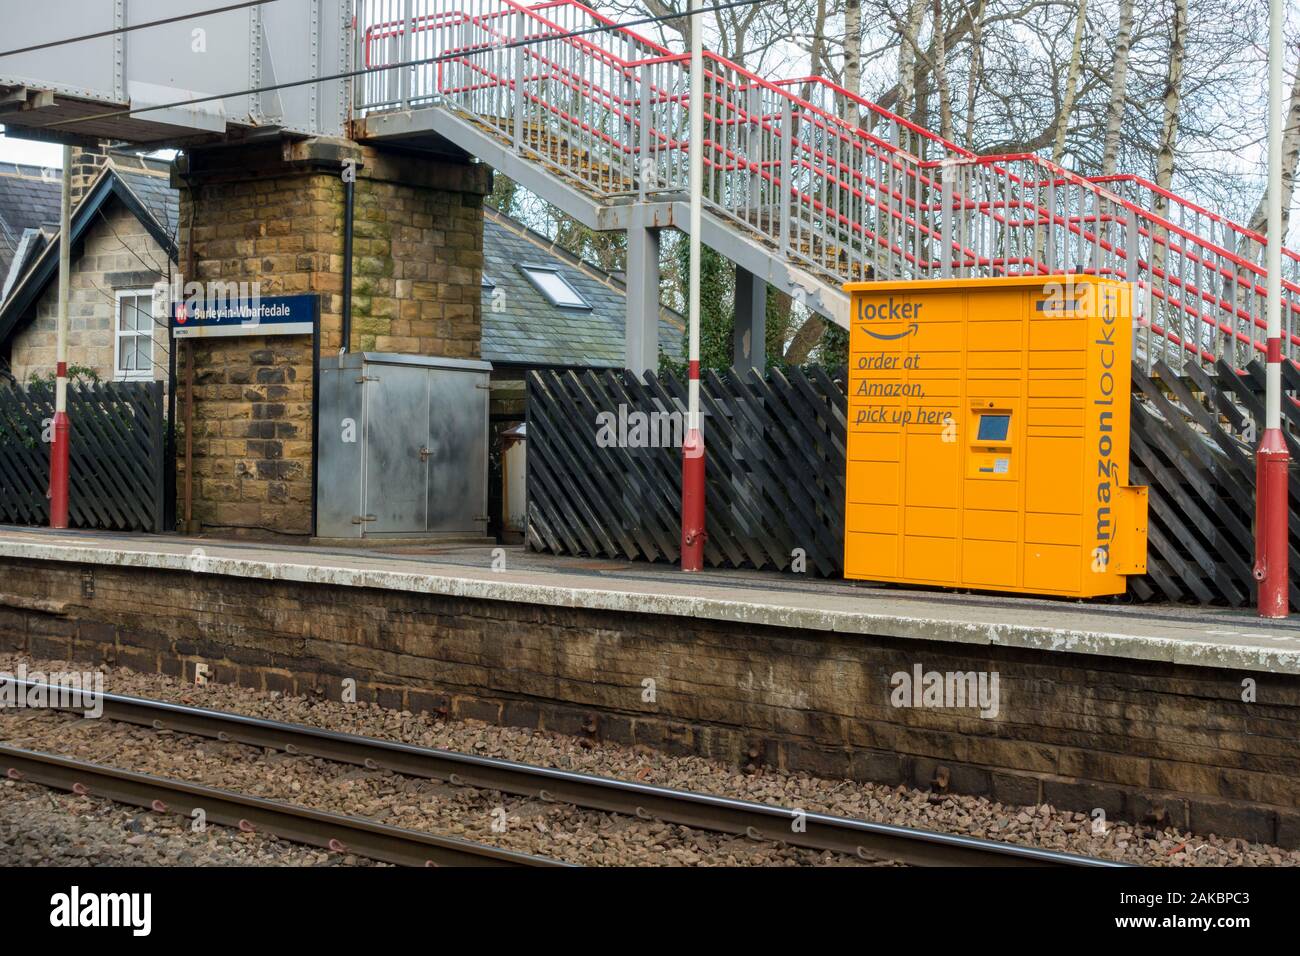 Amazon locker pick up point at Burley-in-Wharfedale railway station on the Leeds Bradford train line, West Yorkshire, UK Stock Photo